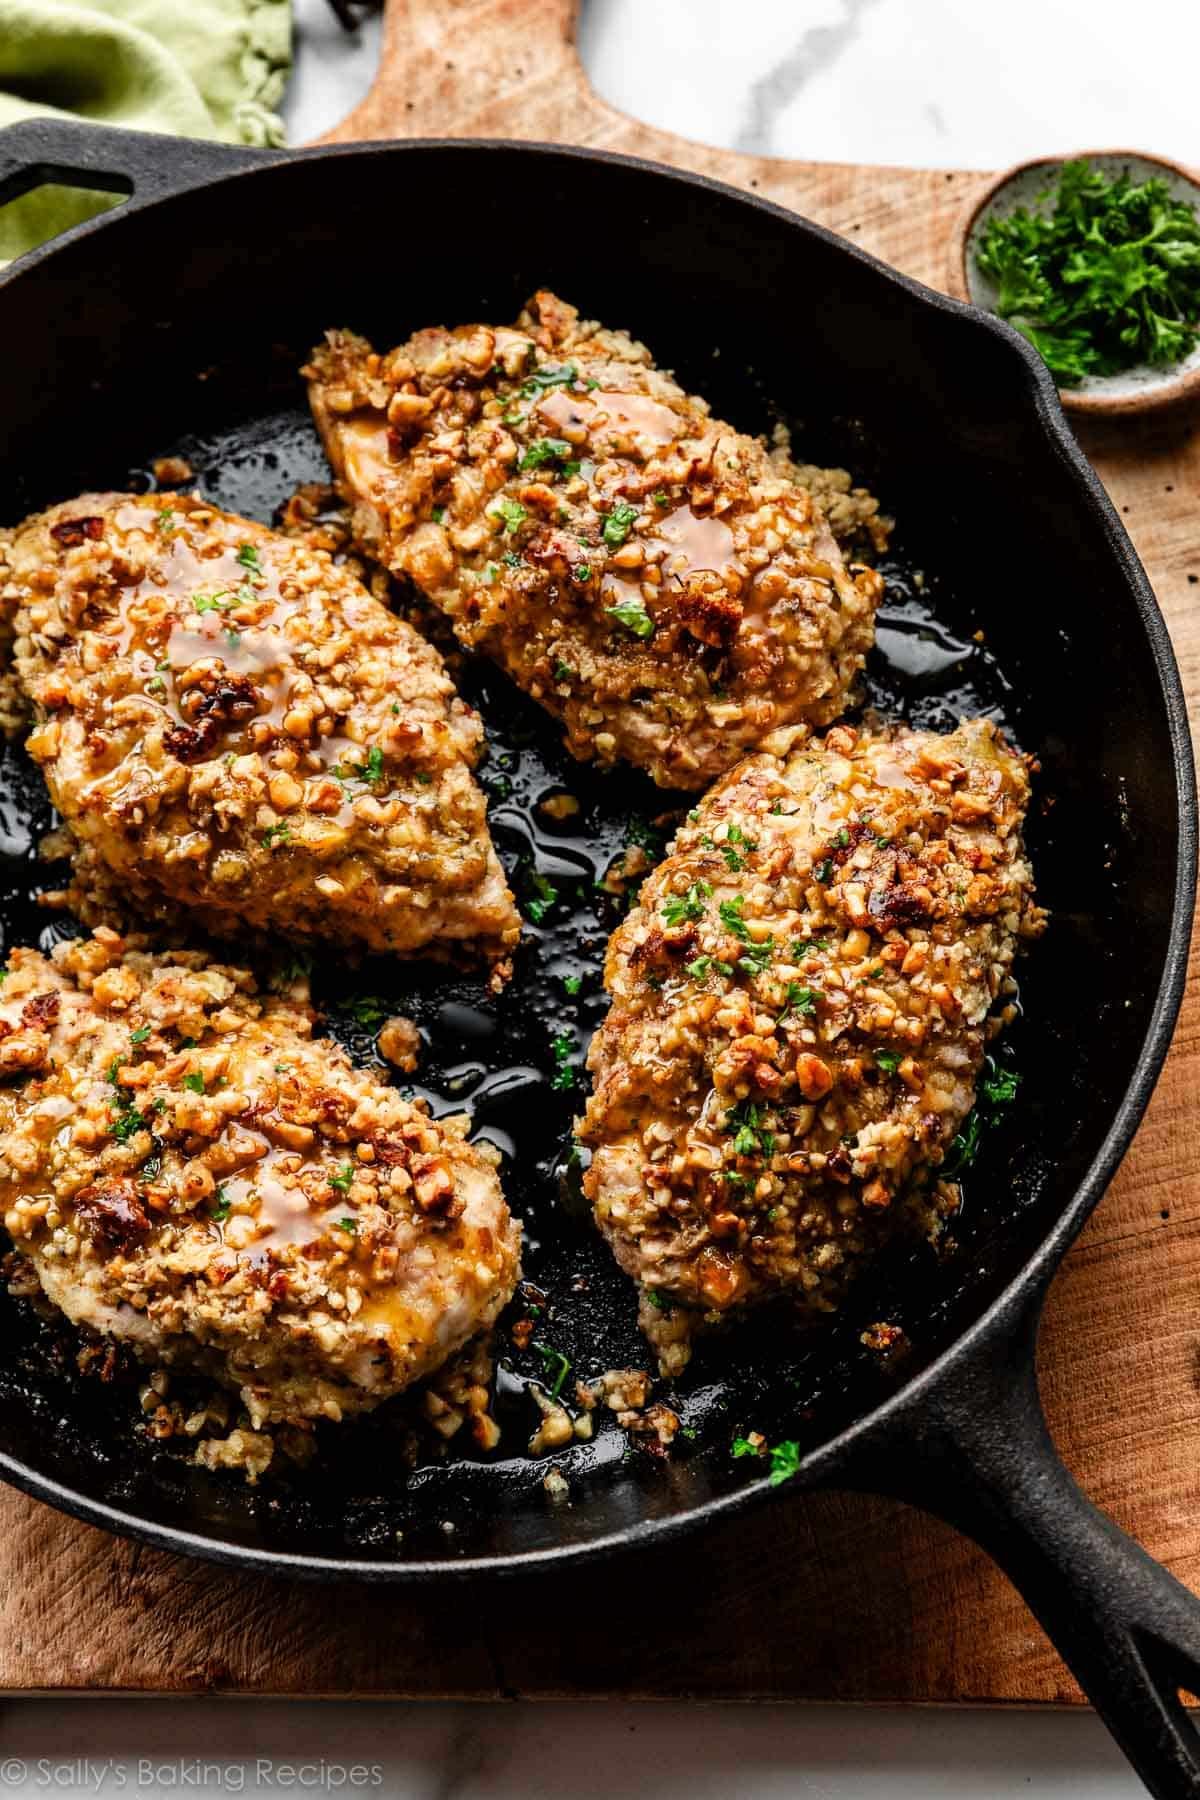 walnut crusted chicken with parsley sprinkled on top in cast iron skillet.